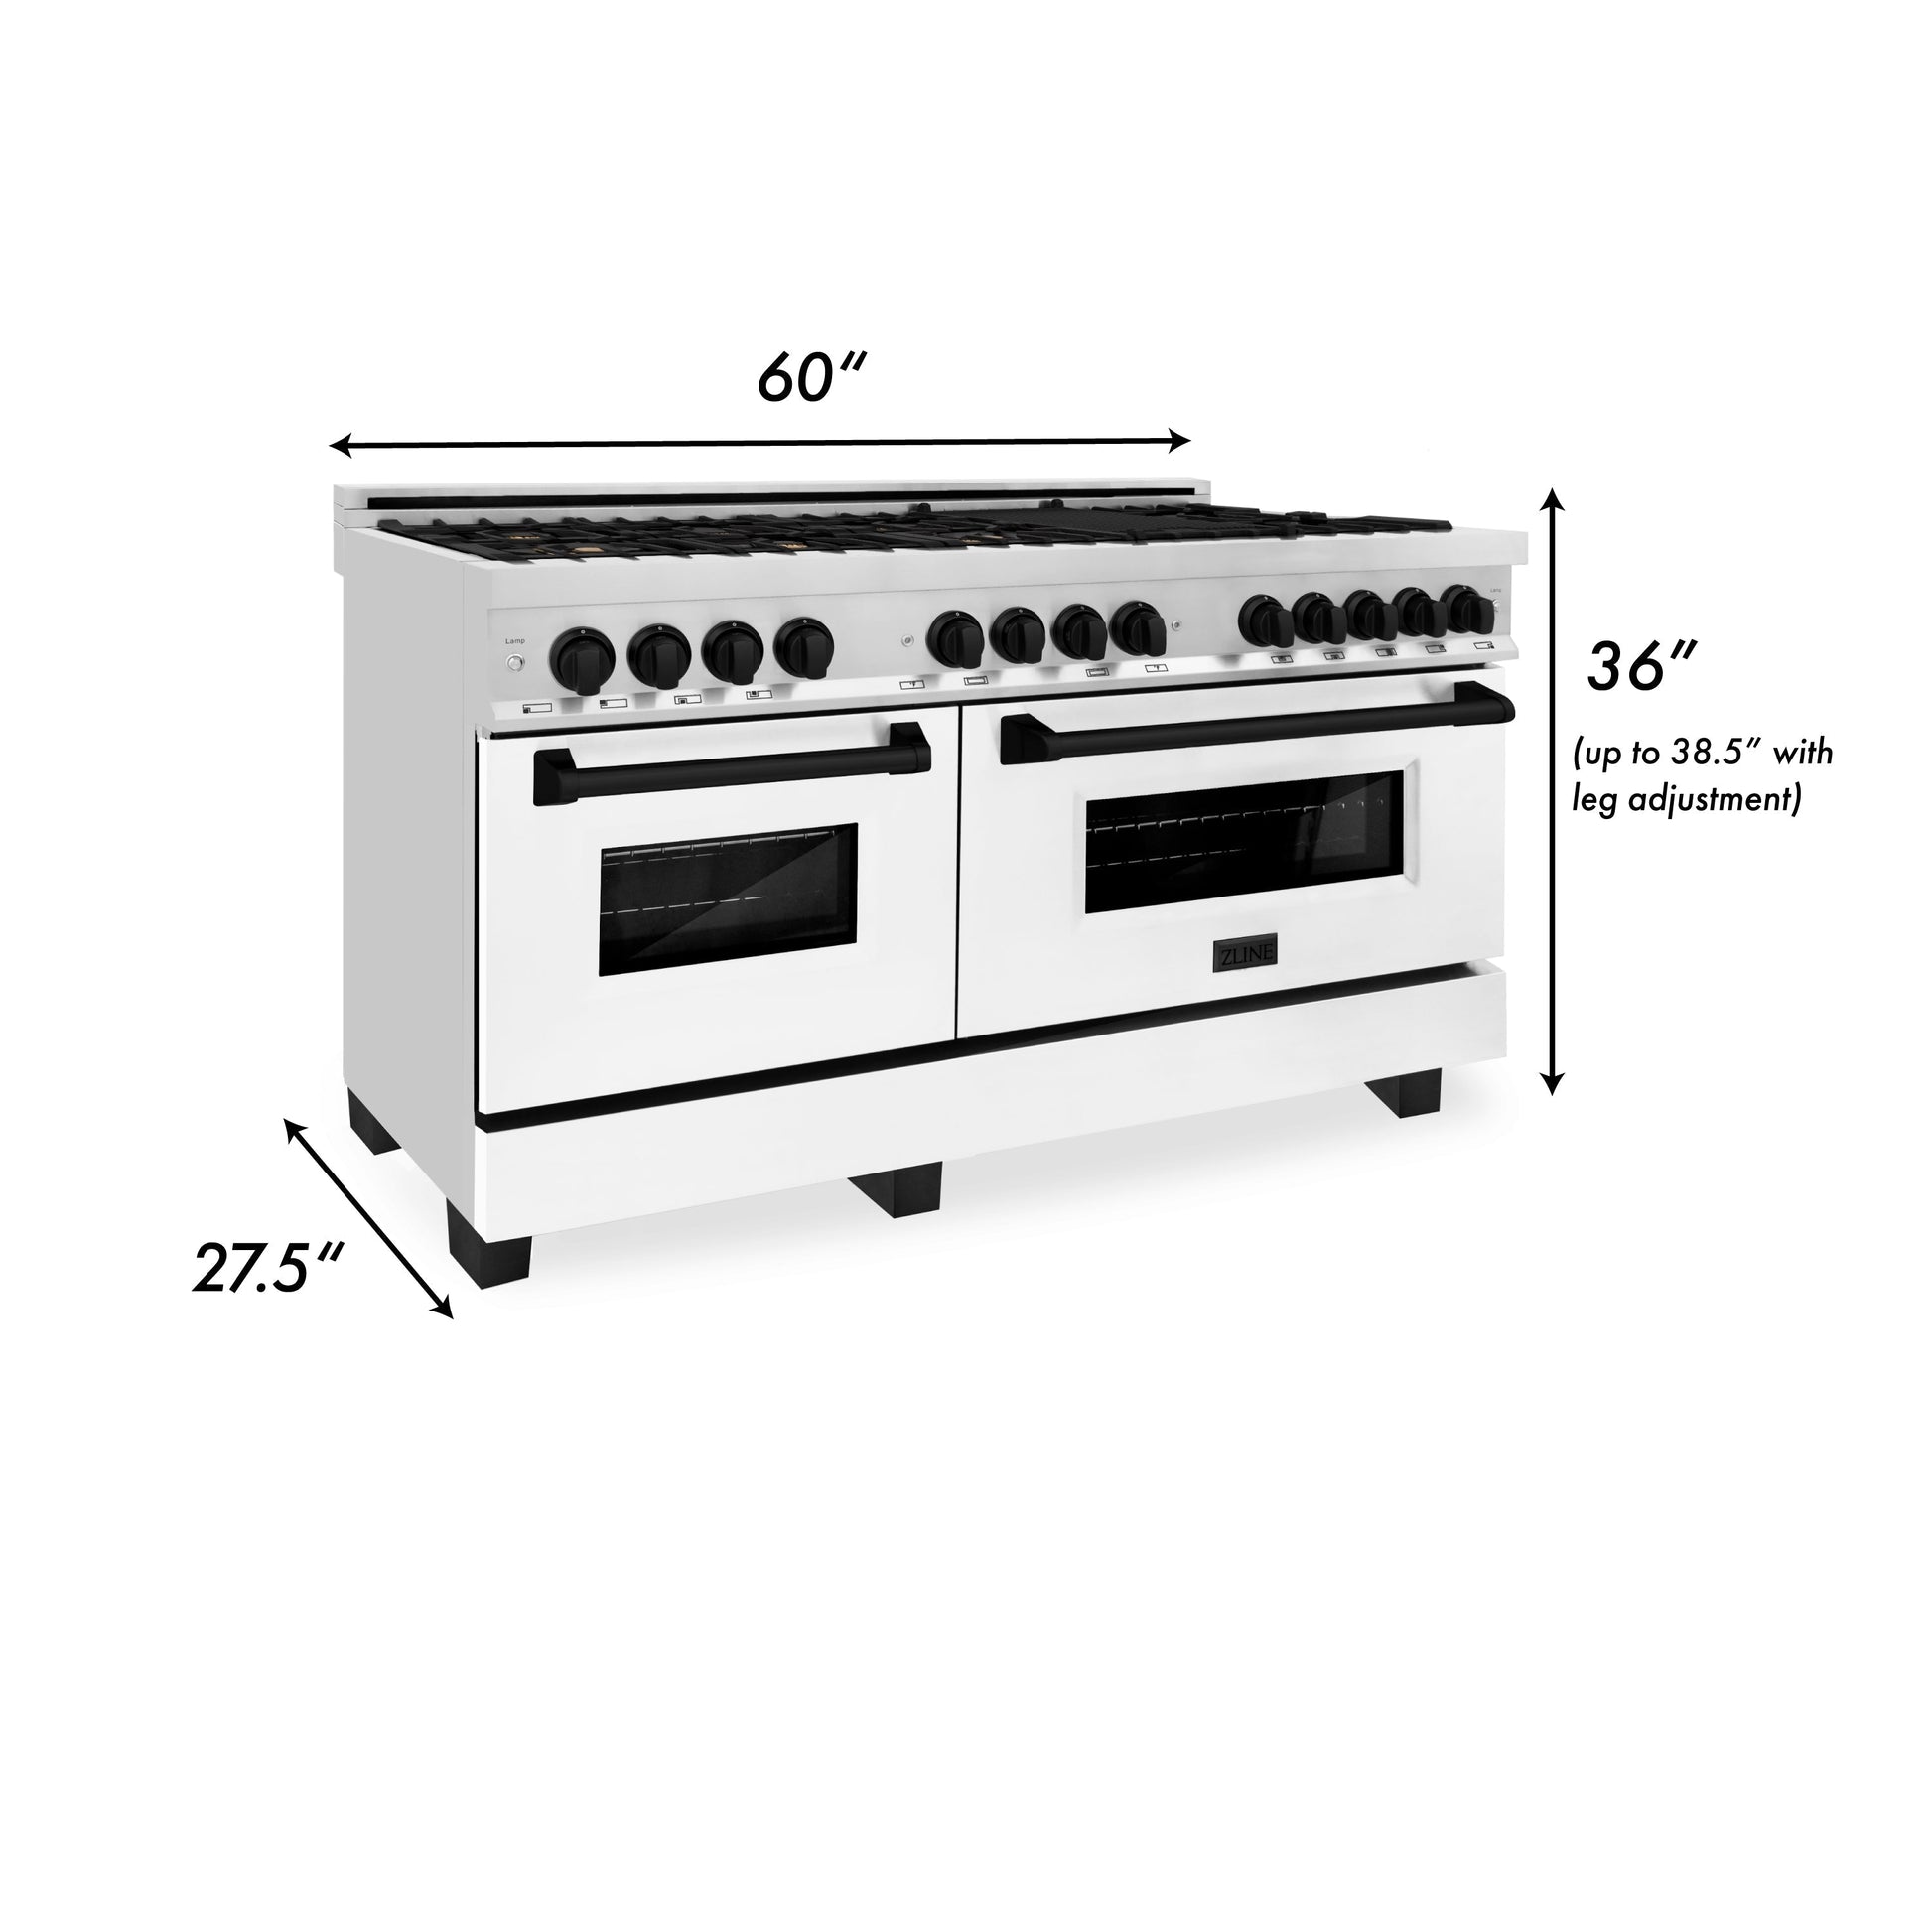 ZLINE Autograph Edition 60" Dual Fuel Range with Gas Stove and Electric Oven - Stainless Steel with Matte White Door and Accents